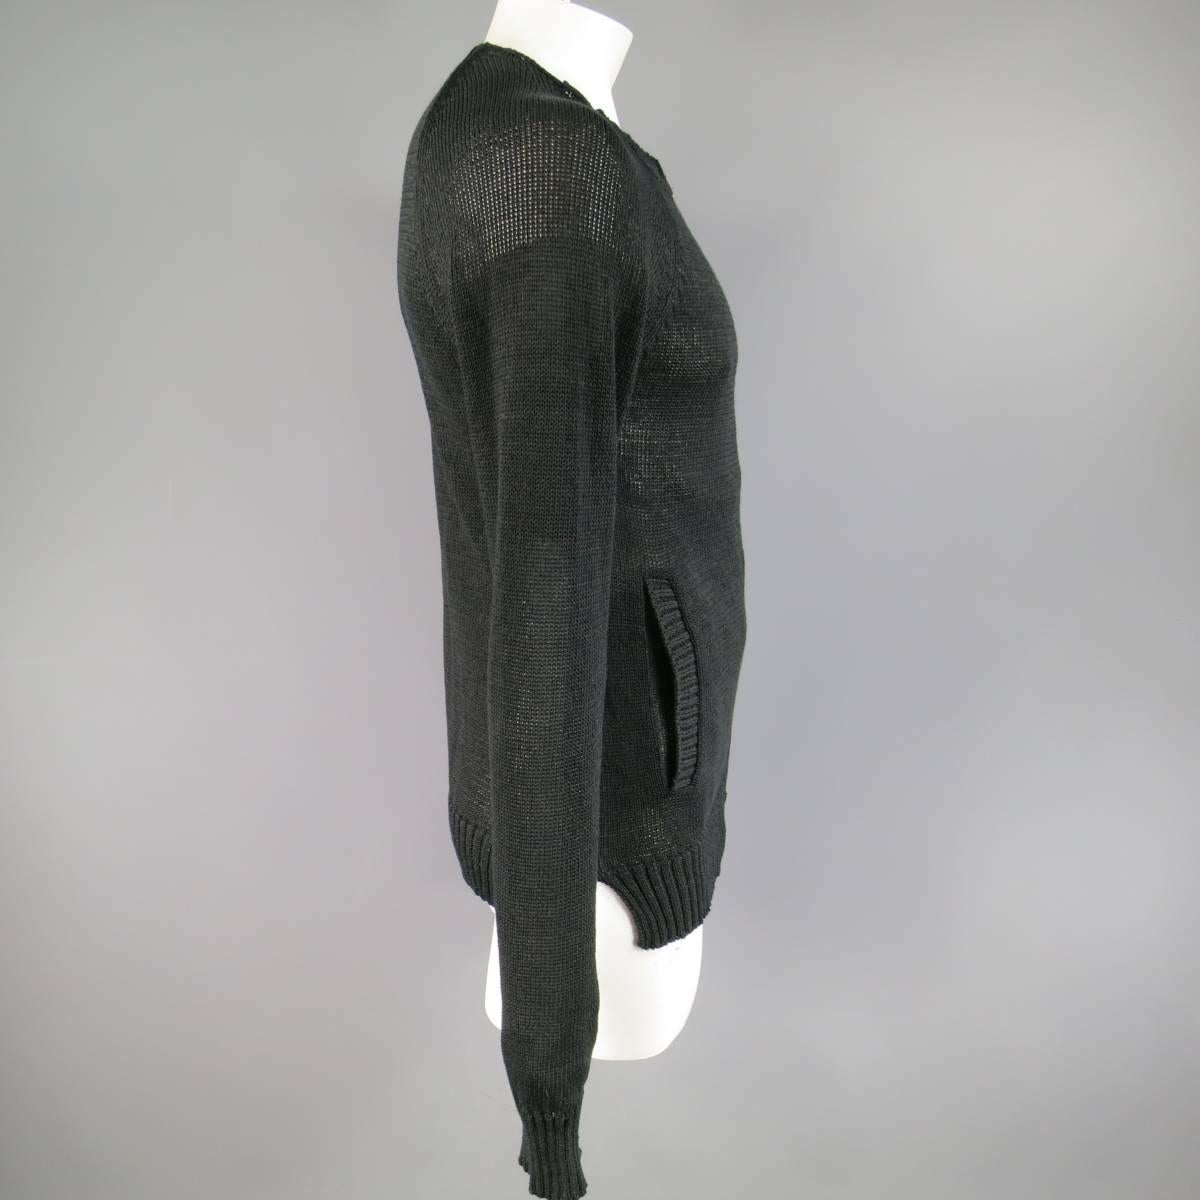 Edgy THE VIRDI-ANNE cardigan in a black cotton mesh knit featuring a round neckline, double zip front, pockets, and slit hems. Made in Japan.
 
Excellent Pre-Owned Condition.
Marked: JP 3
 
Measurements:
 
Shoulder: 19 in.
Chest: 41